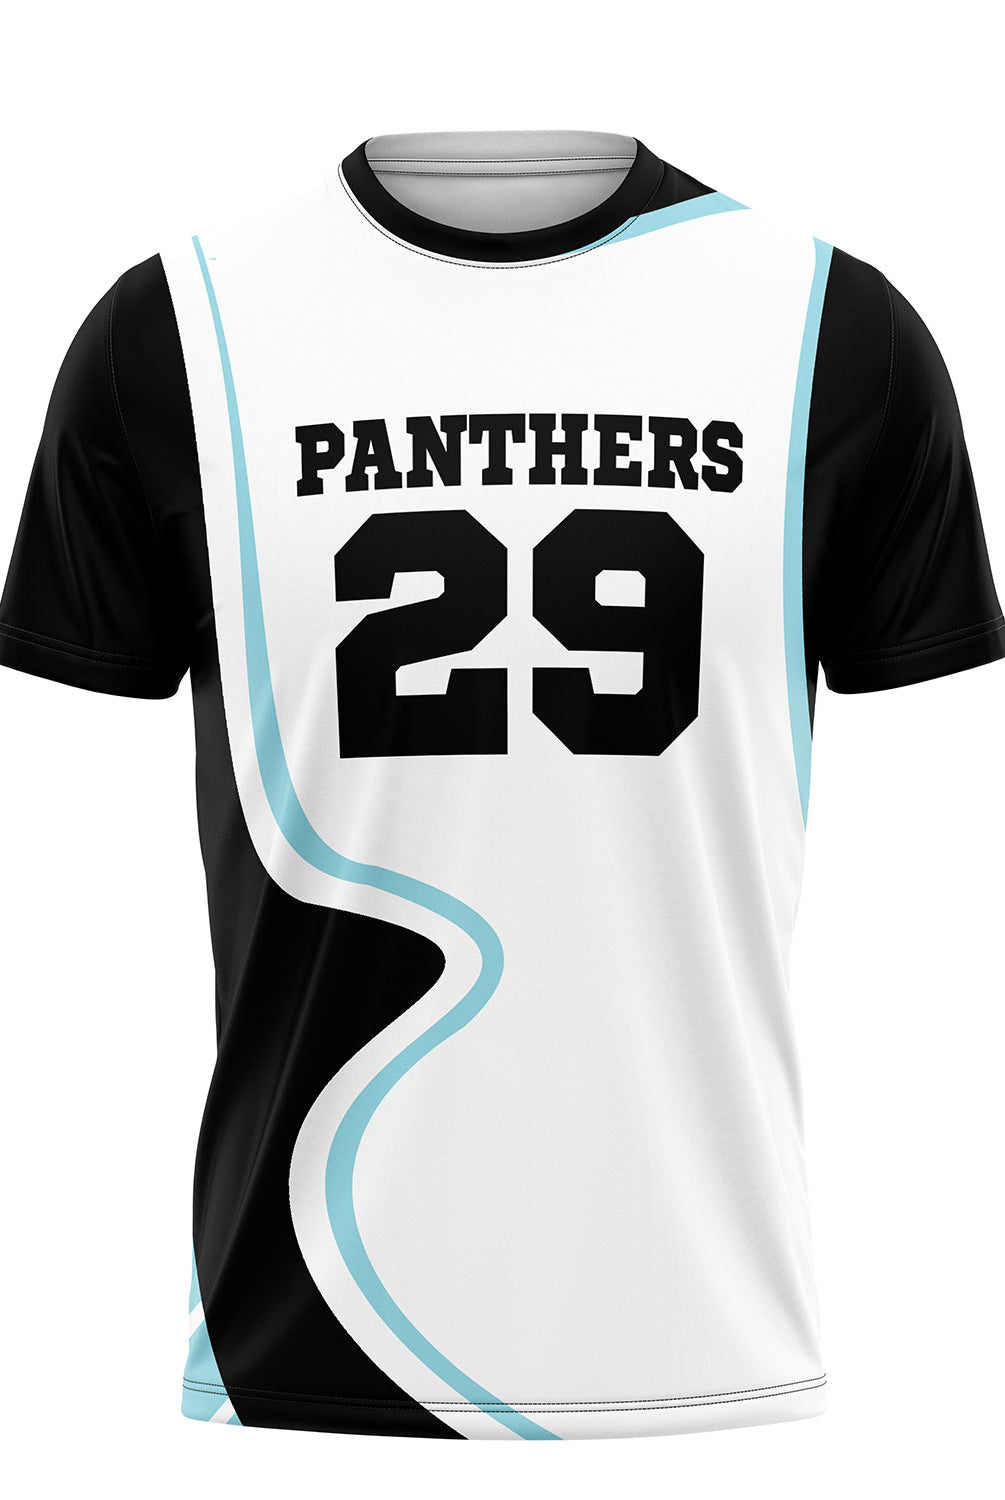 example team jersey panthers number 29